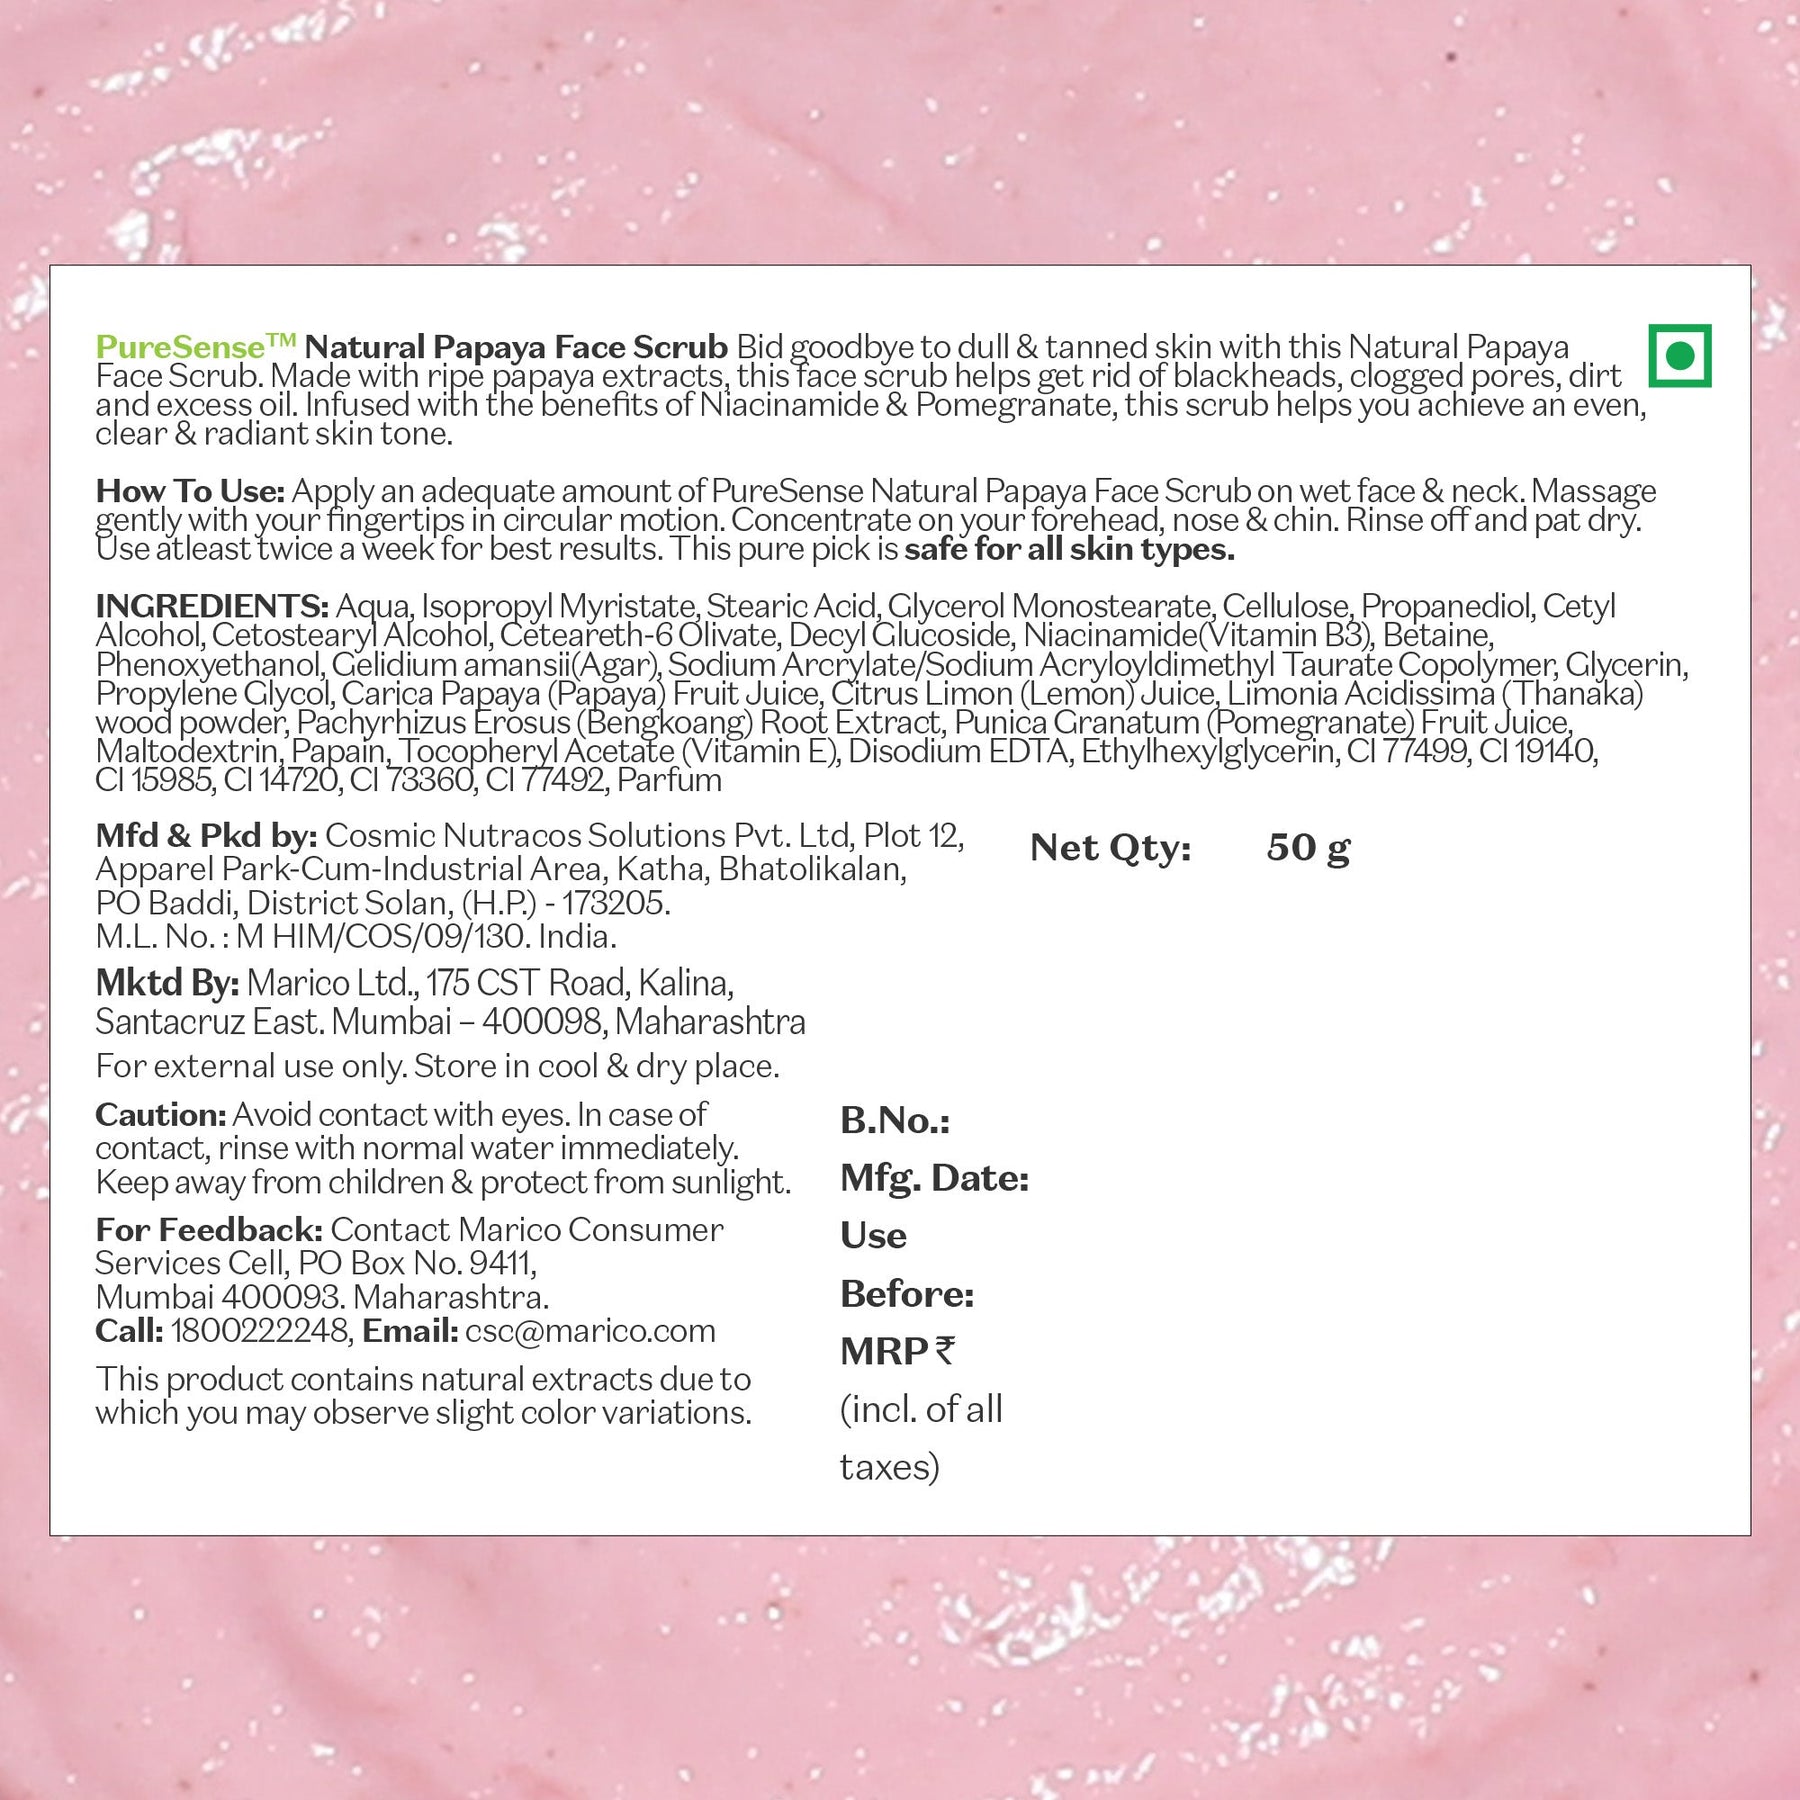 [CRED] Pink Guava Face Scrub | From the makers of Parachute Advansed | Paraben & Sulphate Free | 50gm